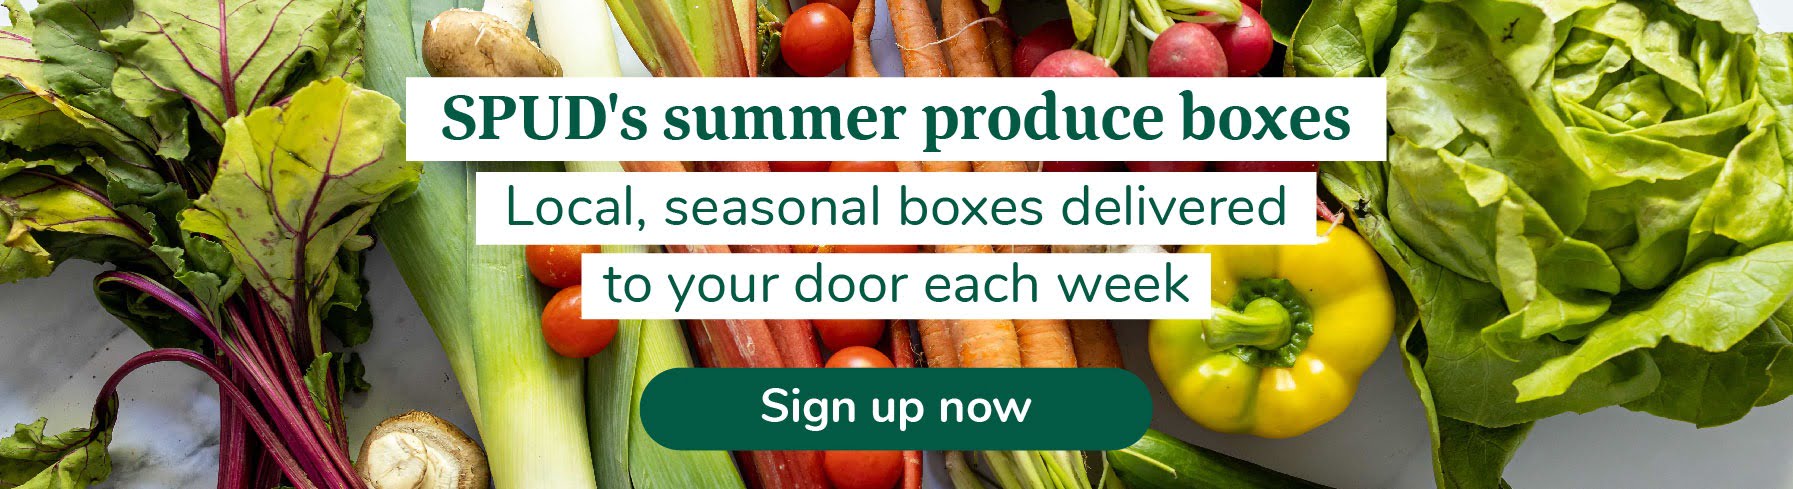 Summer produce boxes at SPUD